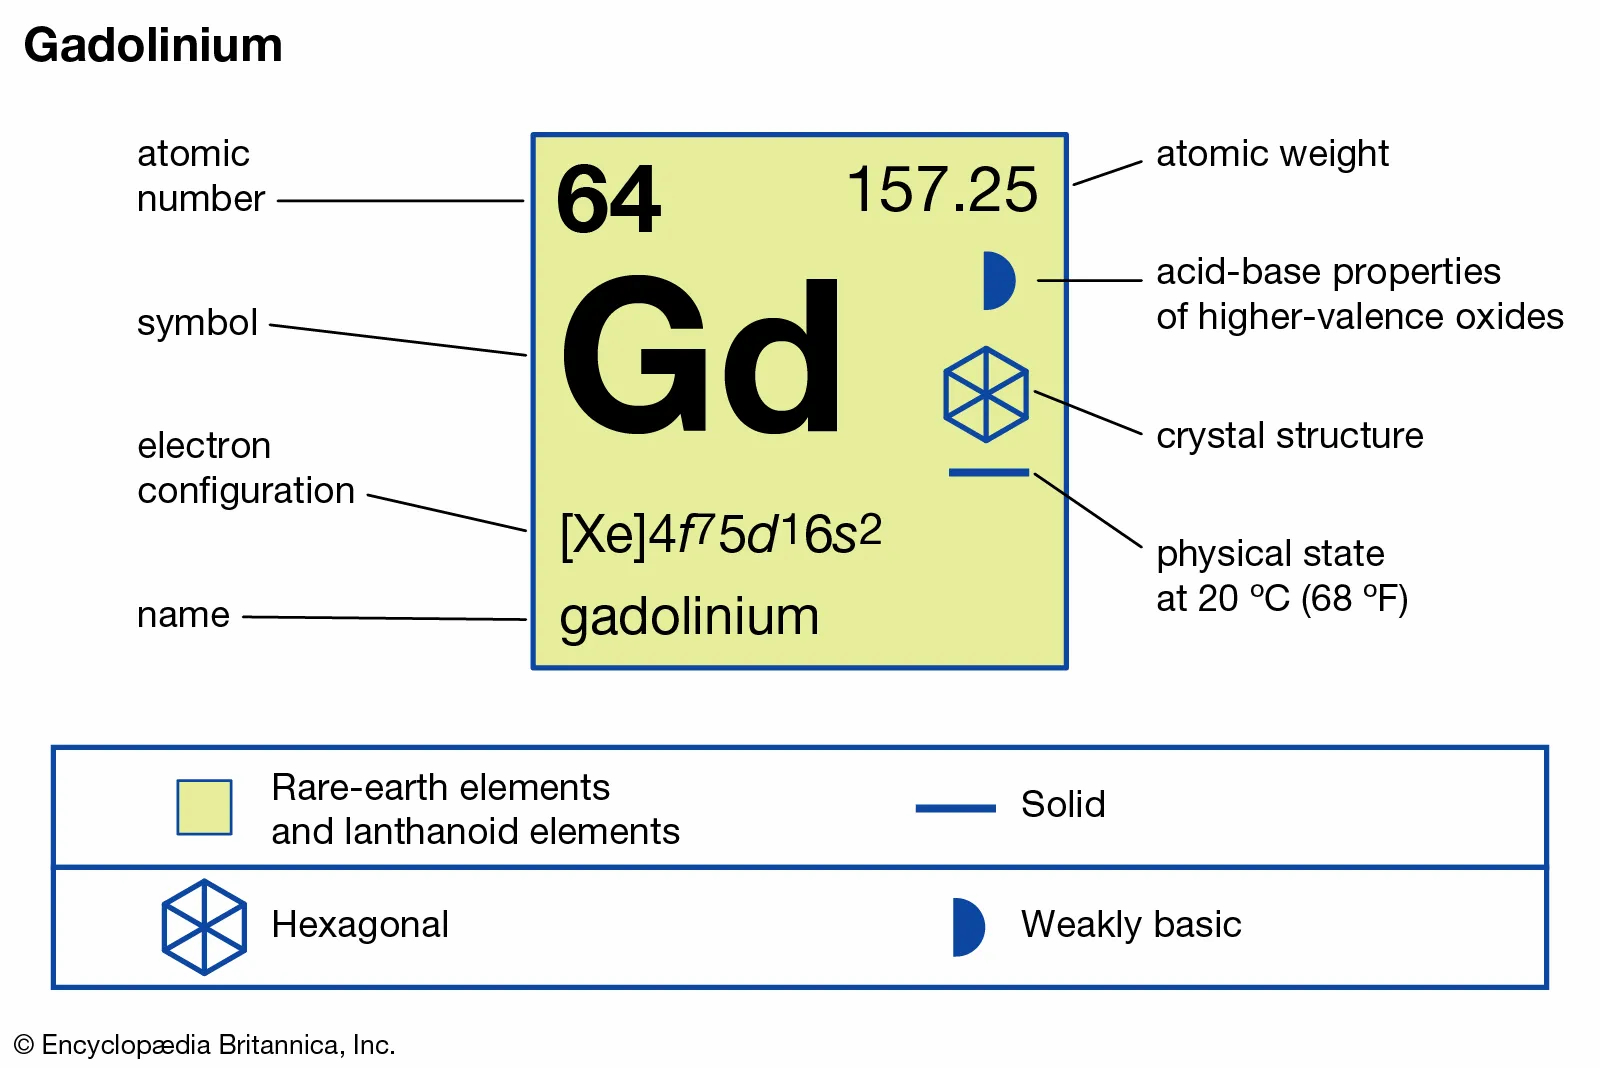 Gadolinium on the Periodic Table. Atomic number is 64. Symbol is Gd. Atomic weight, 157.25. 